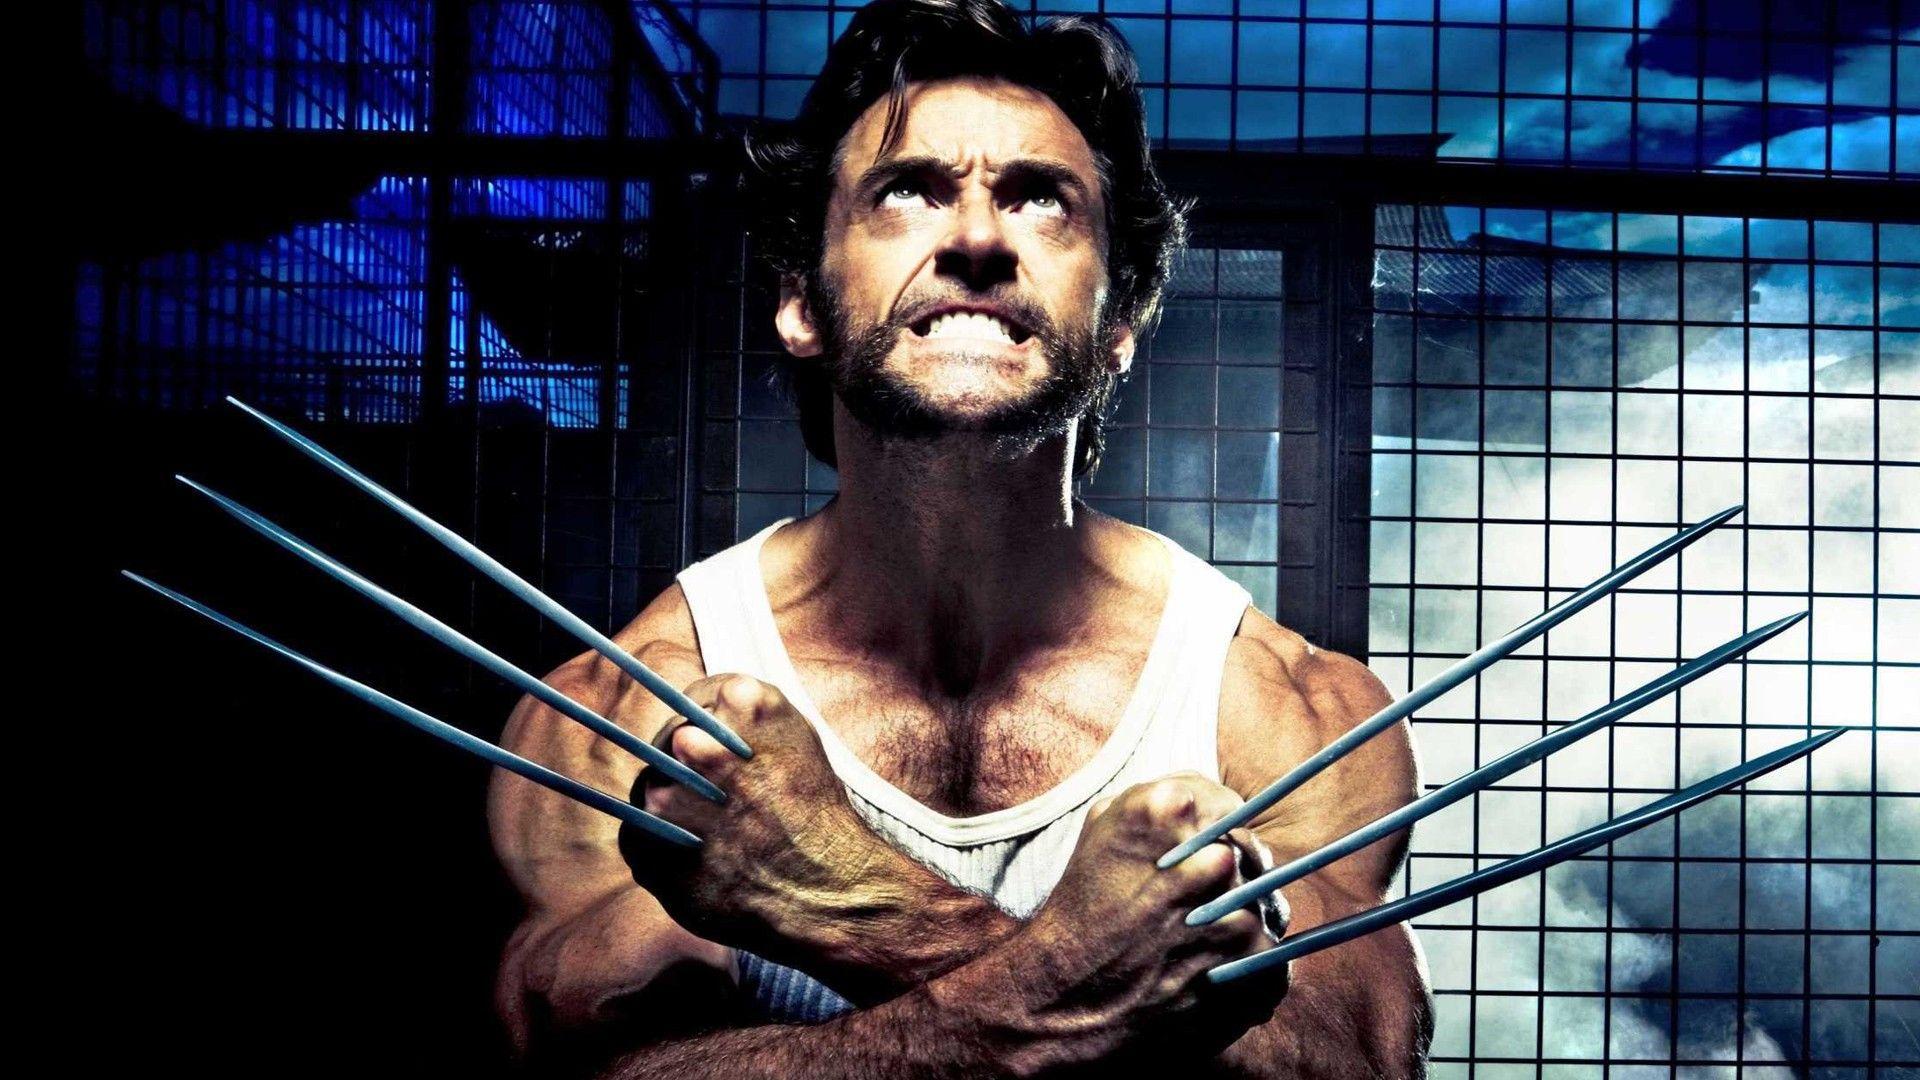 Wallpaper Tagged With WOLVERINE. WOLVERINE HD Wallpaper